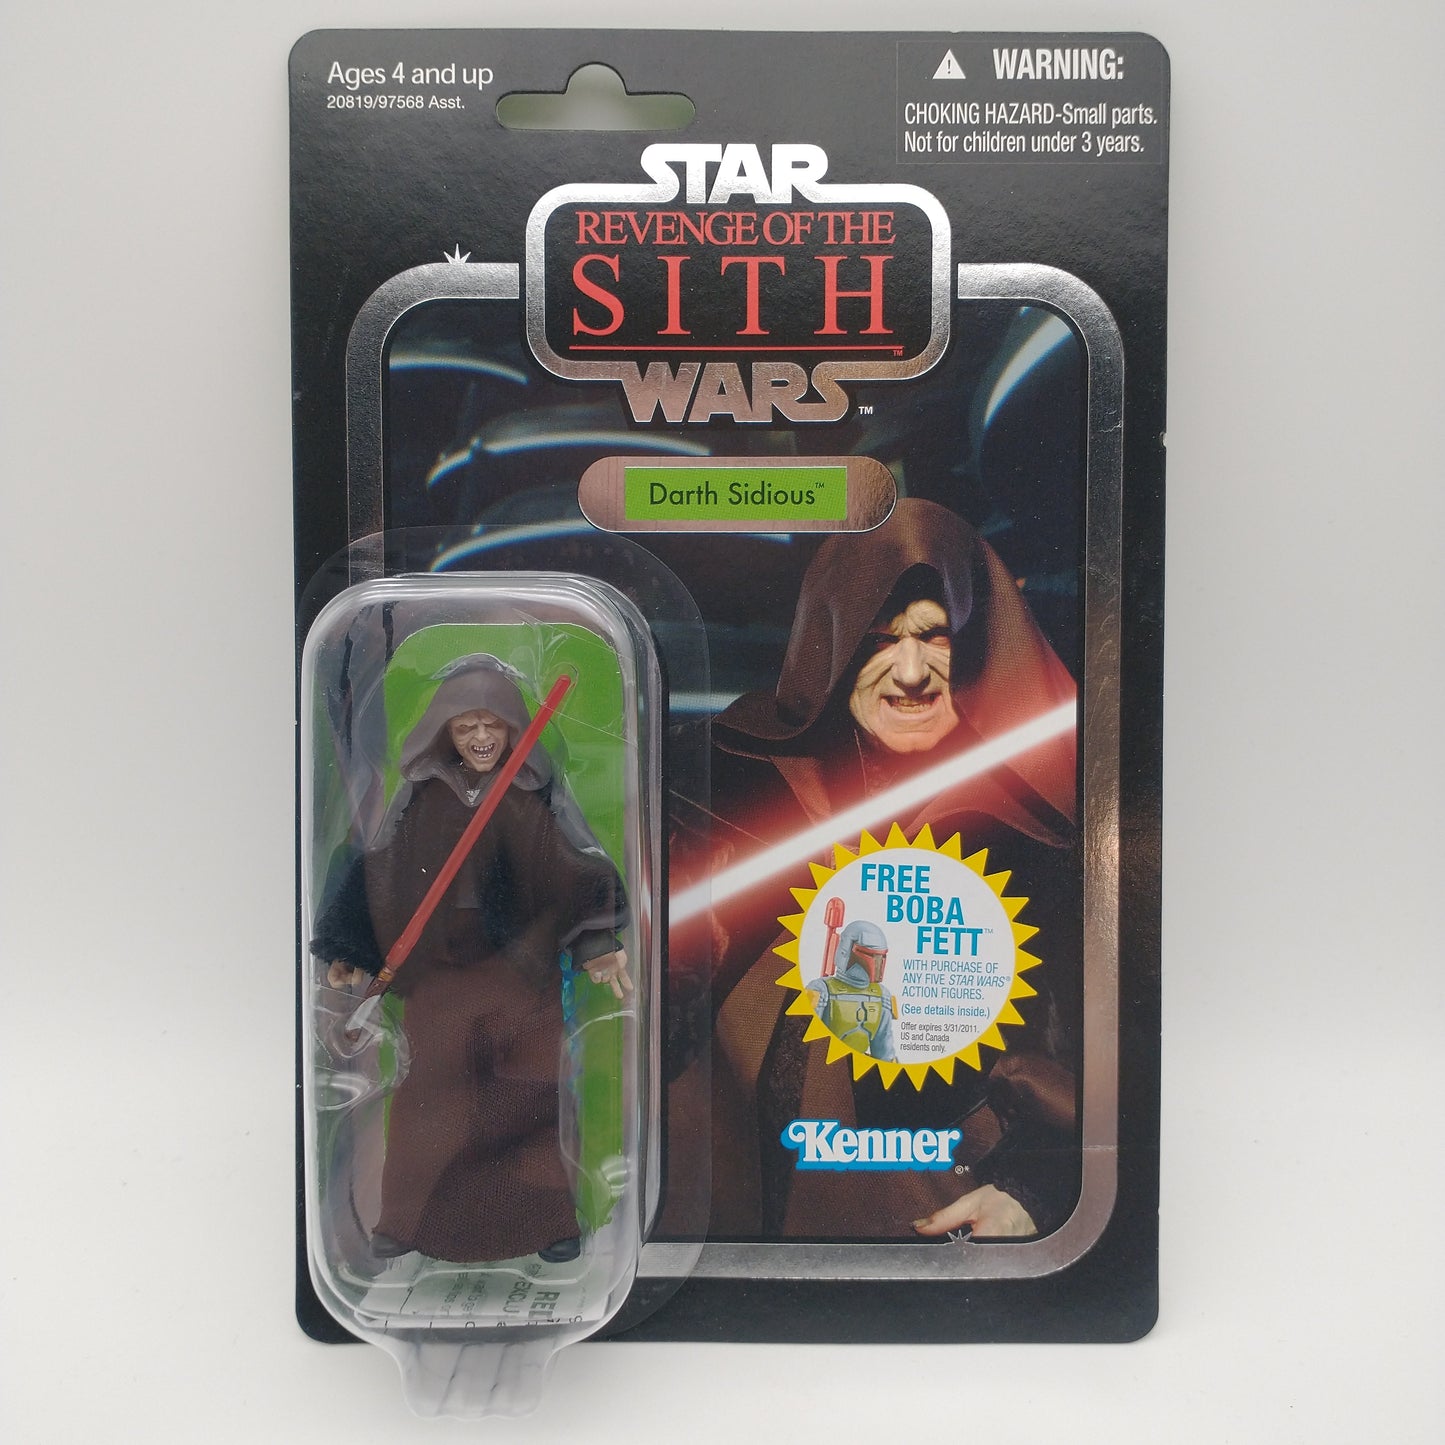 Star Wars Revenge of the Sith Darth Sidious Kenner 2010 Vtg Collection